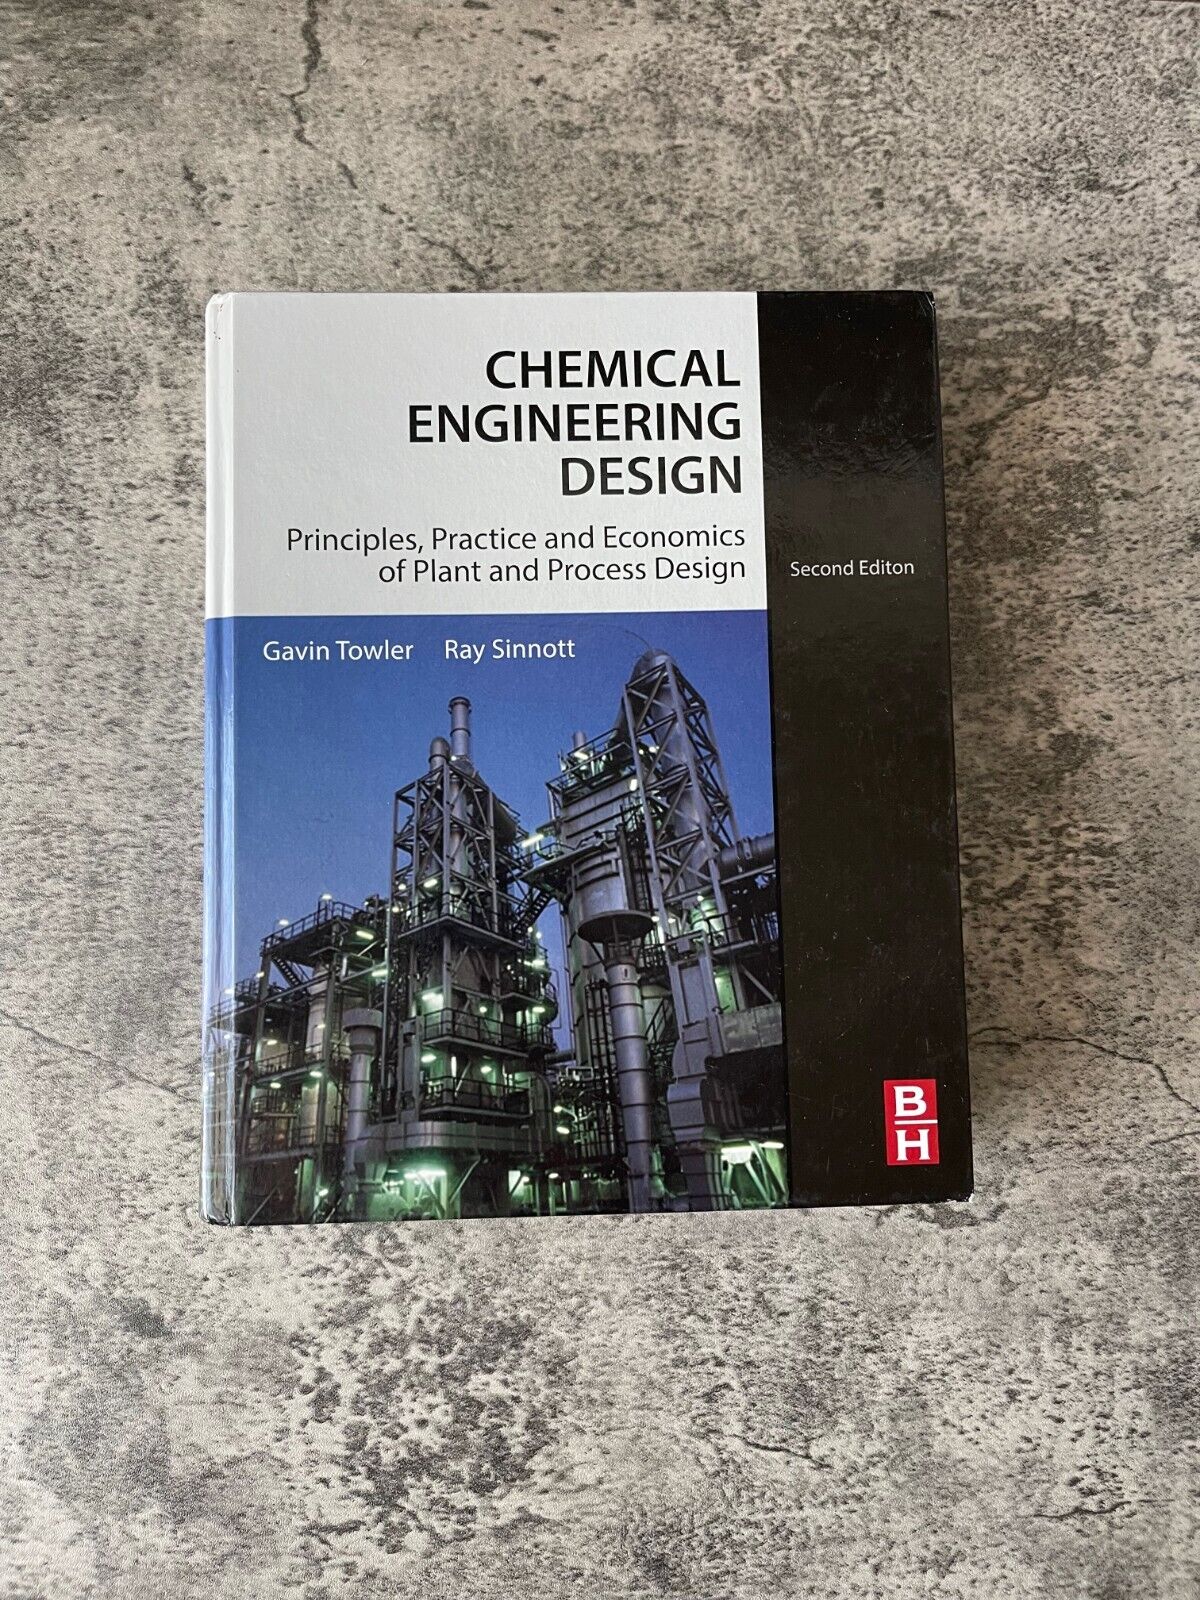 Chemical Engineering Design / Second Edition